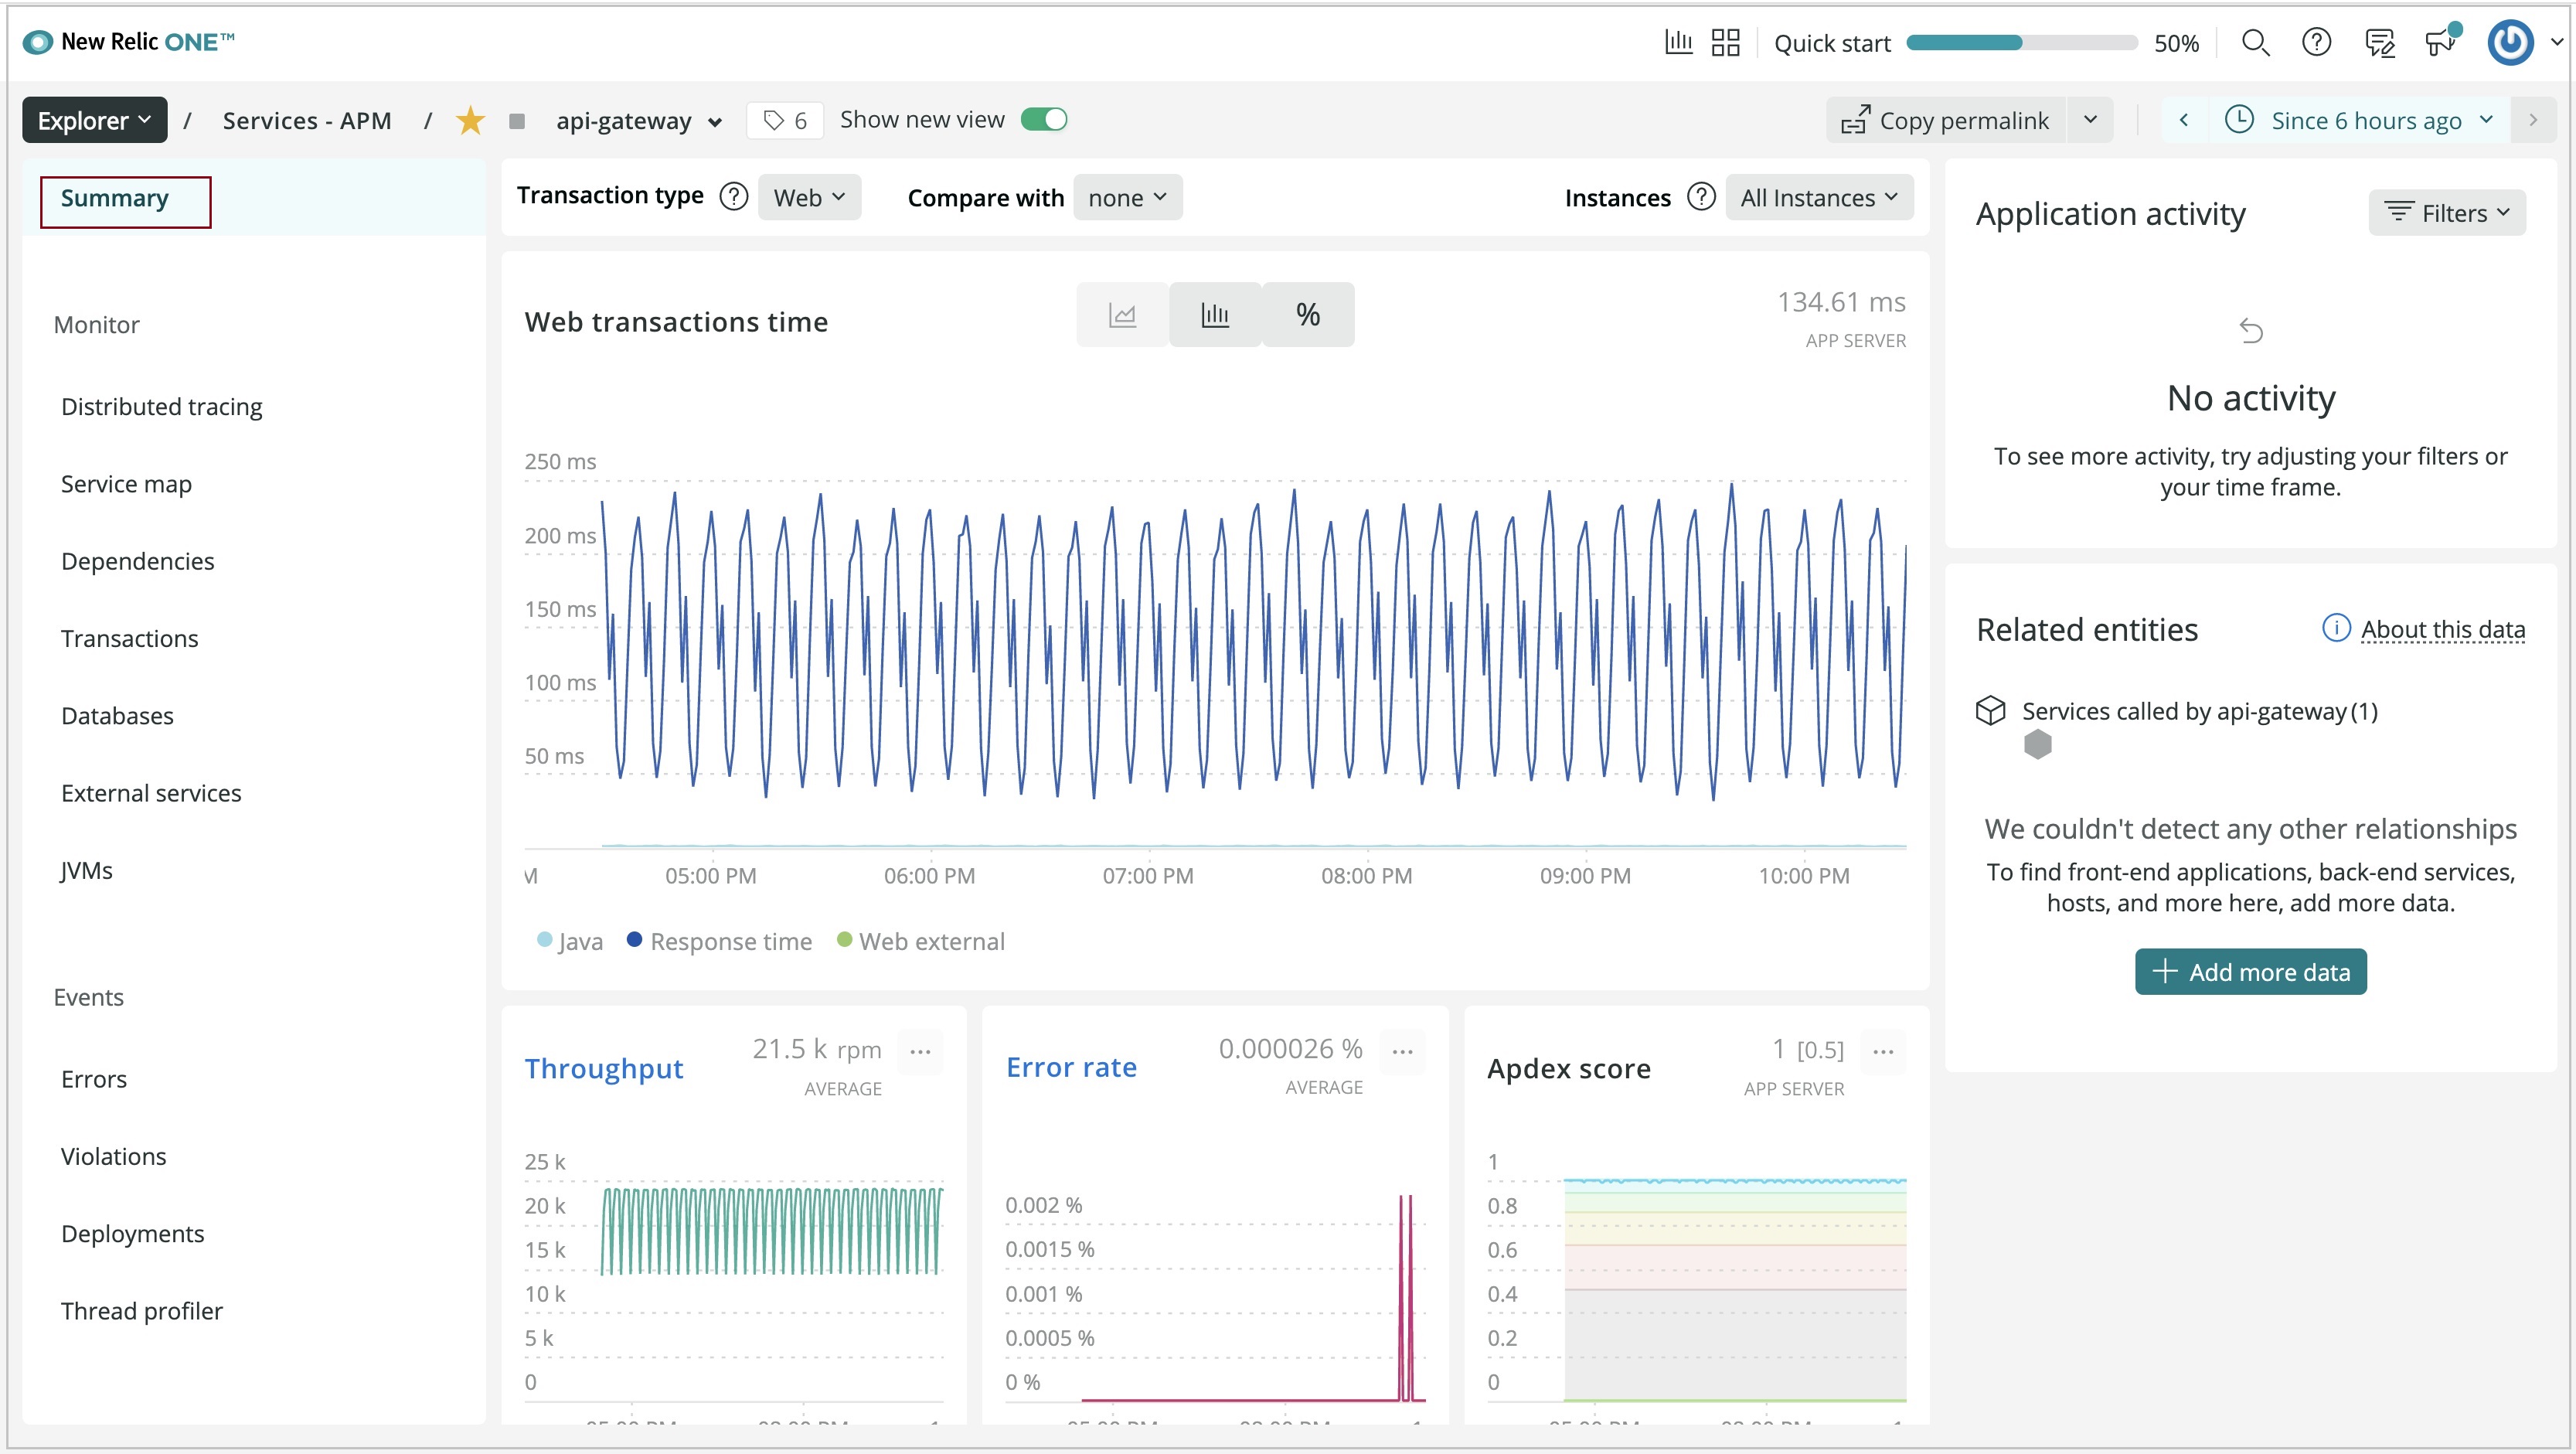 Screenshot of the New Relic dashboard showing the API Gateway summary page.